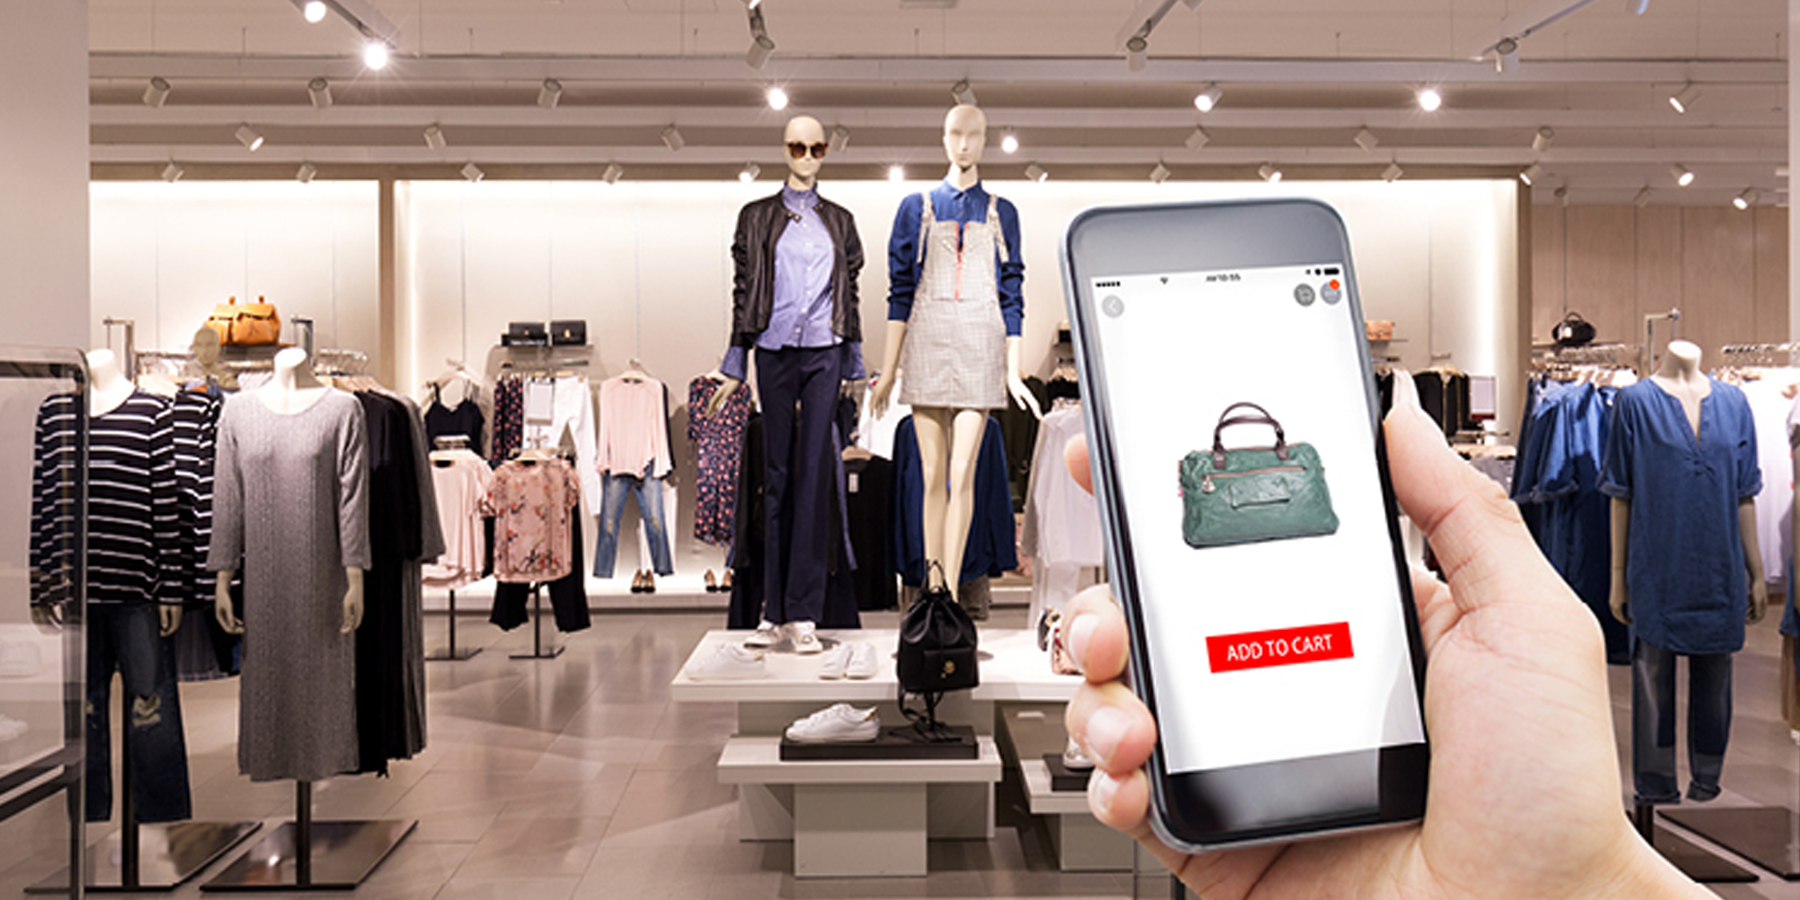 Improving In-Store Experiences with Location Services